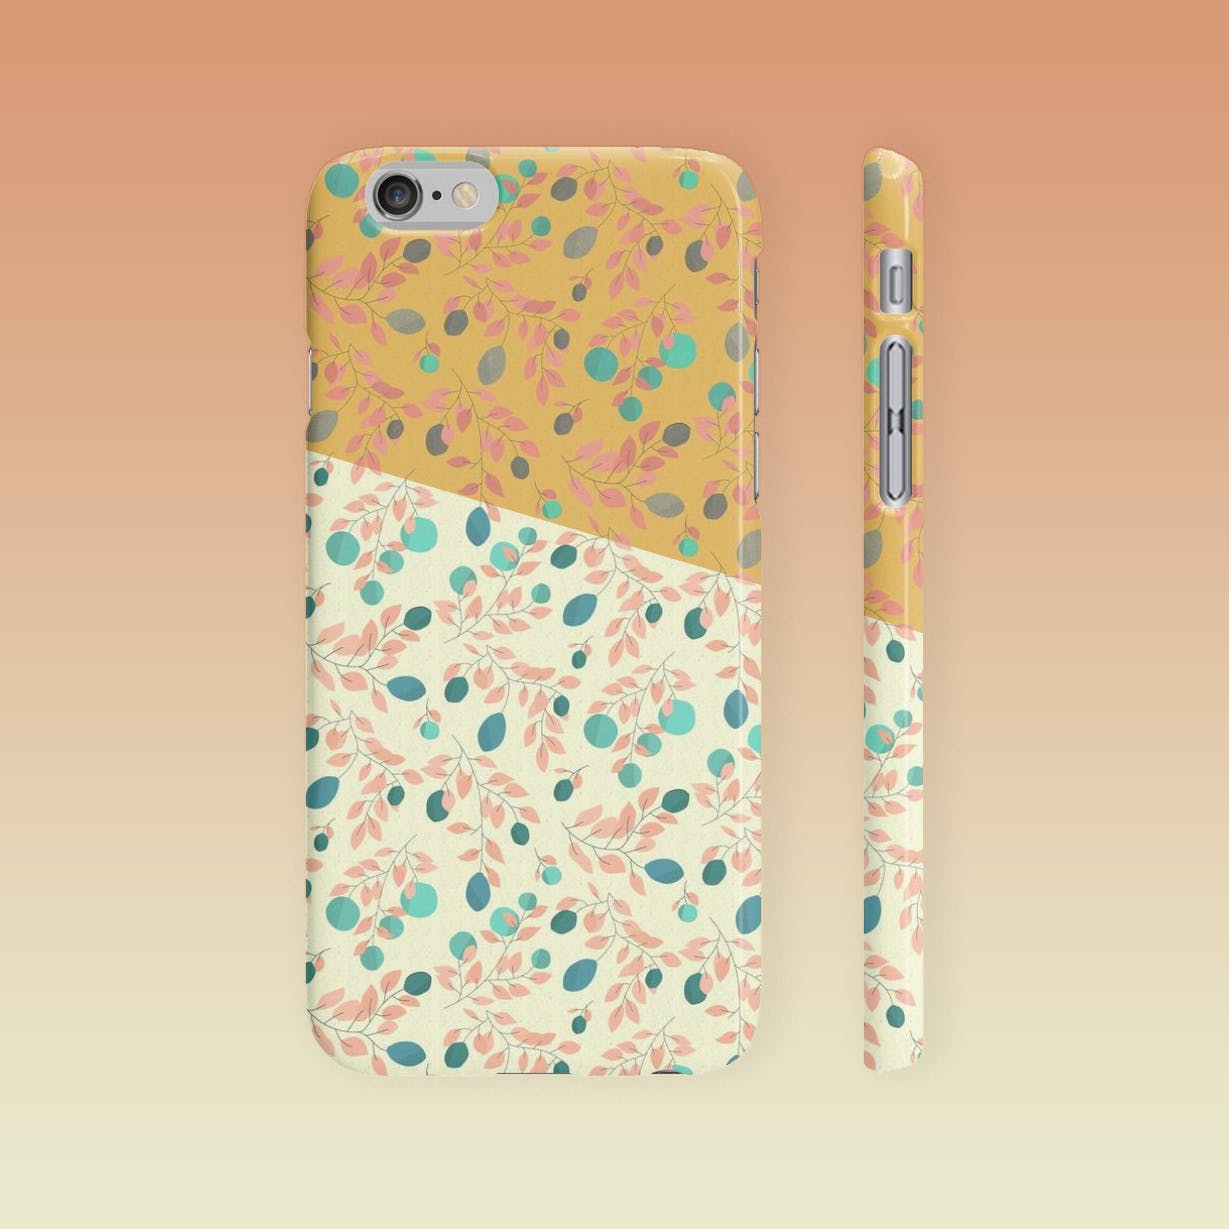 Colorful phone cases for iPhones media 3